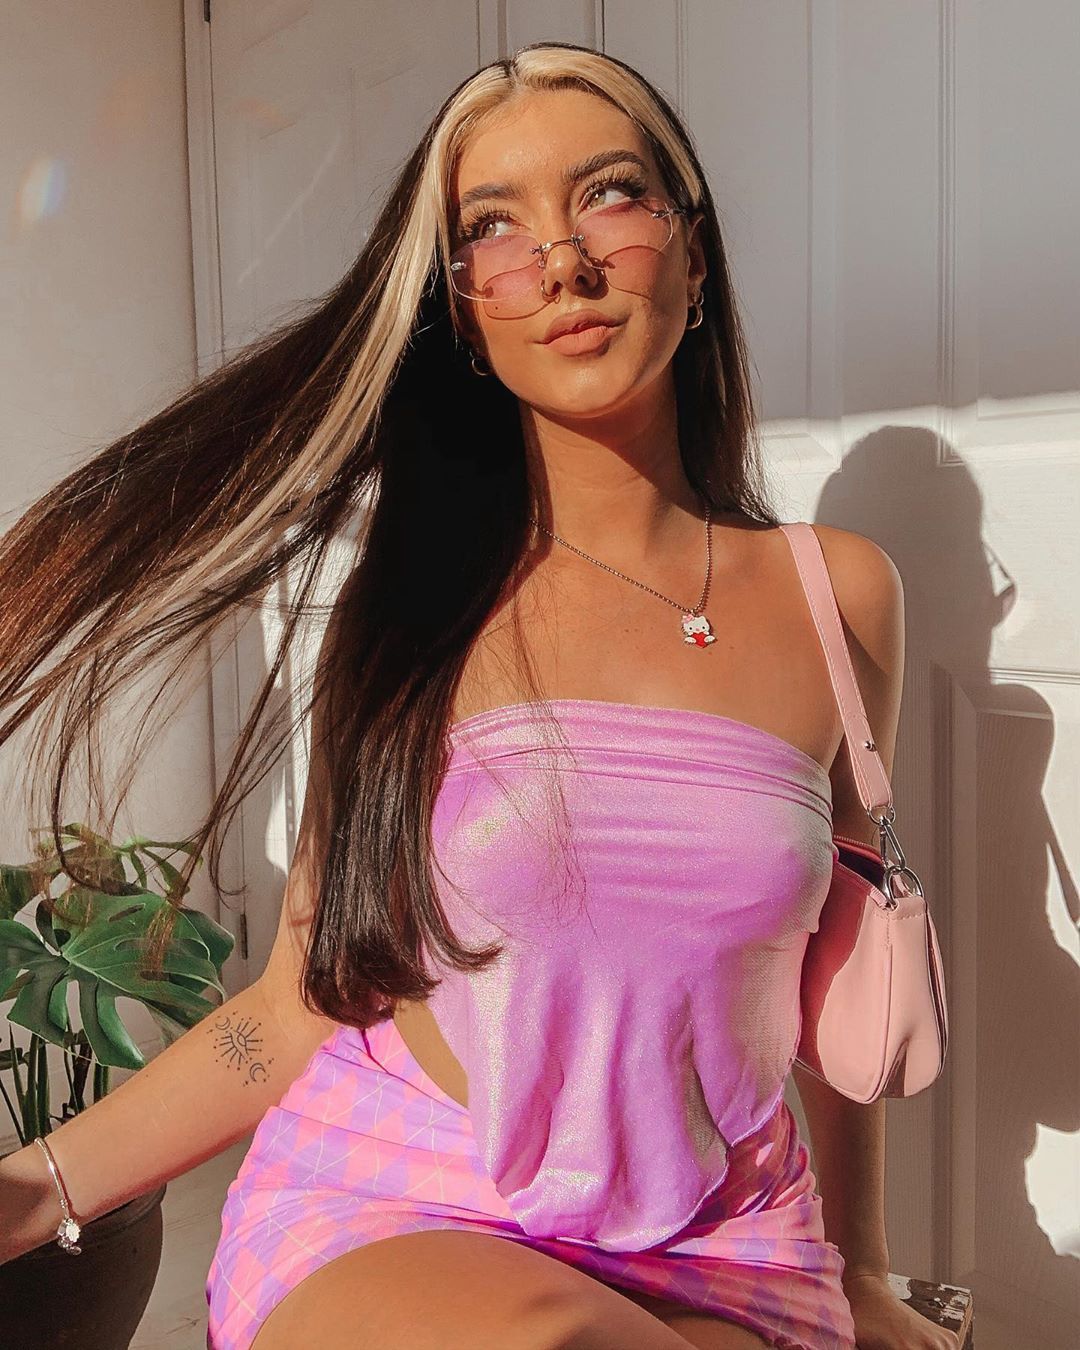 ZAFUL.com - Pink vibes.💫💫 @yviescarlet . Tap to shop or shop via the 🔗 in bio.⁣⁣⁣⁣⁣⁣⁣⁣⁣⁣⁣⁣⁣
.⁣⁣⁣⁣⁣⁣⁣⁣⁣⁣⁣⁣⁣
⁣⁣⁣⁣⁣⁣⁣⁣⁣⁣⁣⁣⁣
Search ID: 468498201 (Bag)⁣
⁣⁣⁣⁣⁣
.⁣⁣⁣⁣⁣⁣⁣⁣⁣⁣⁣⁣⁣
⚡Discount code: PZF520 (18% of...